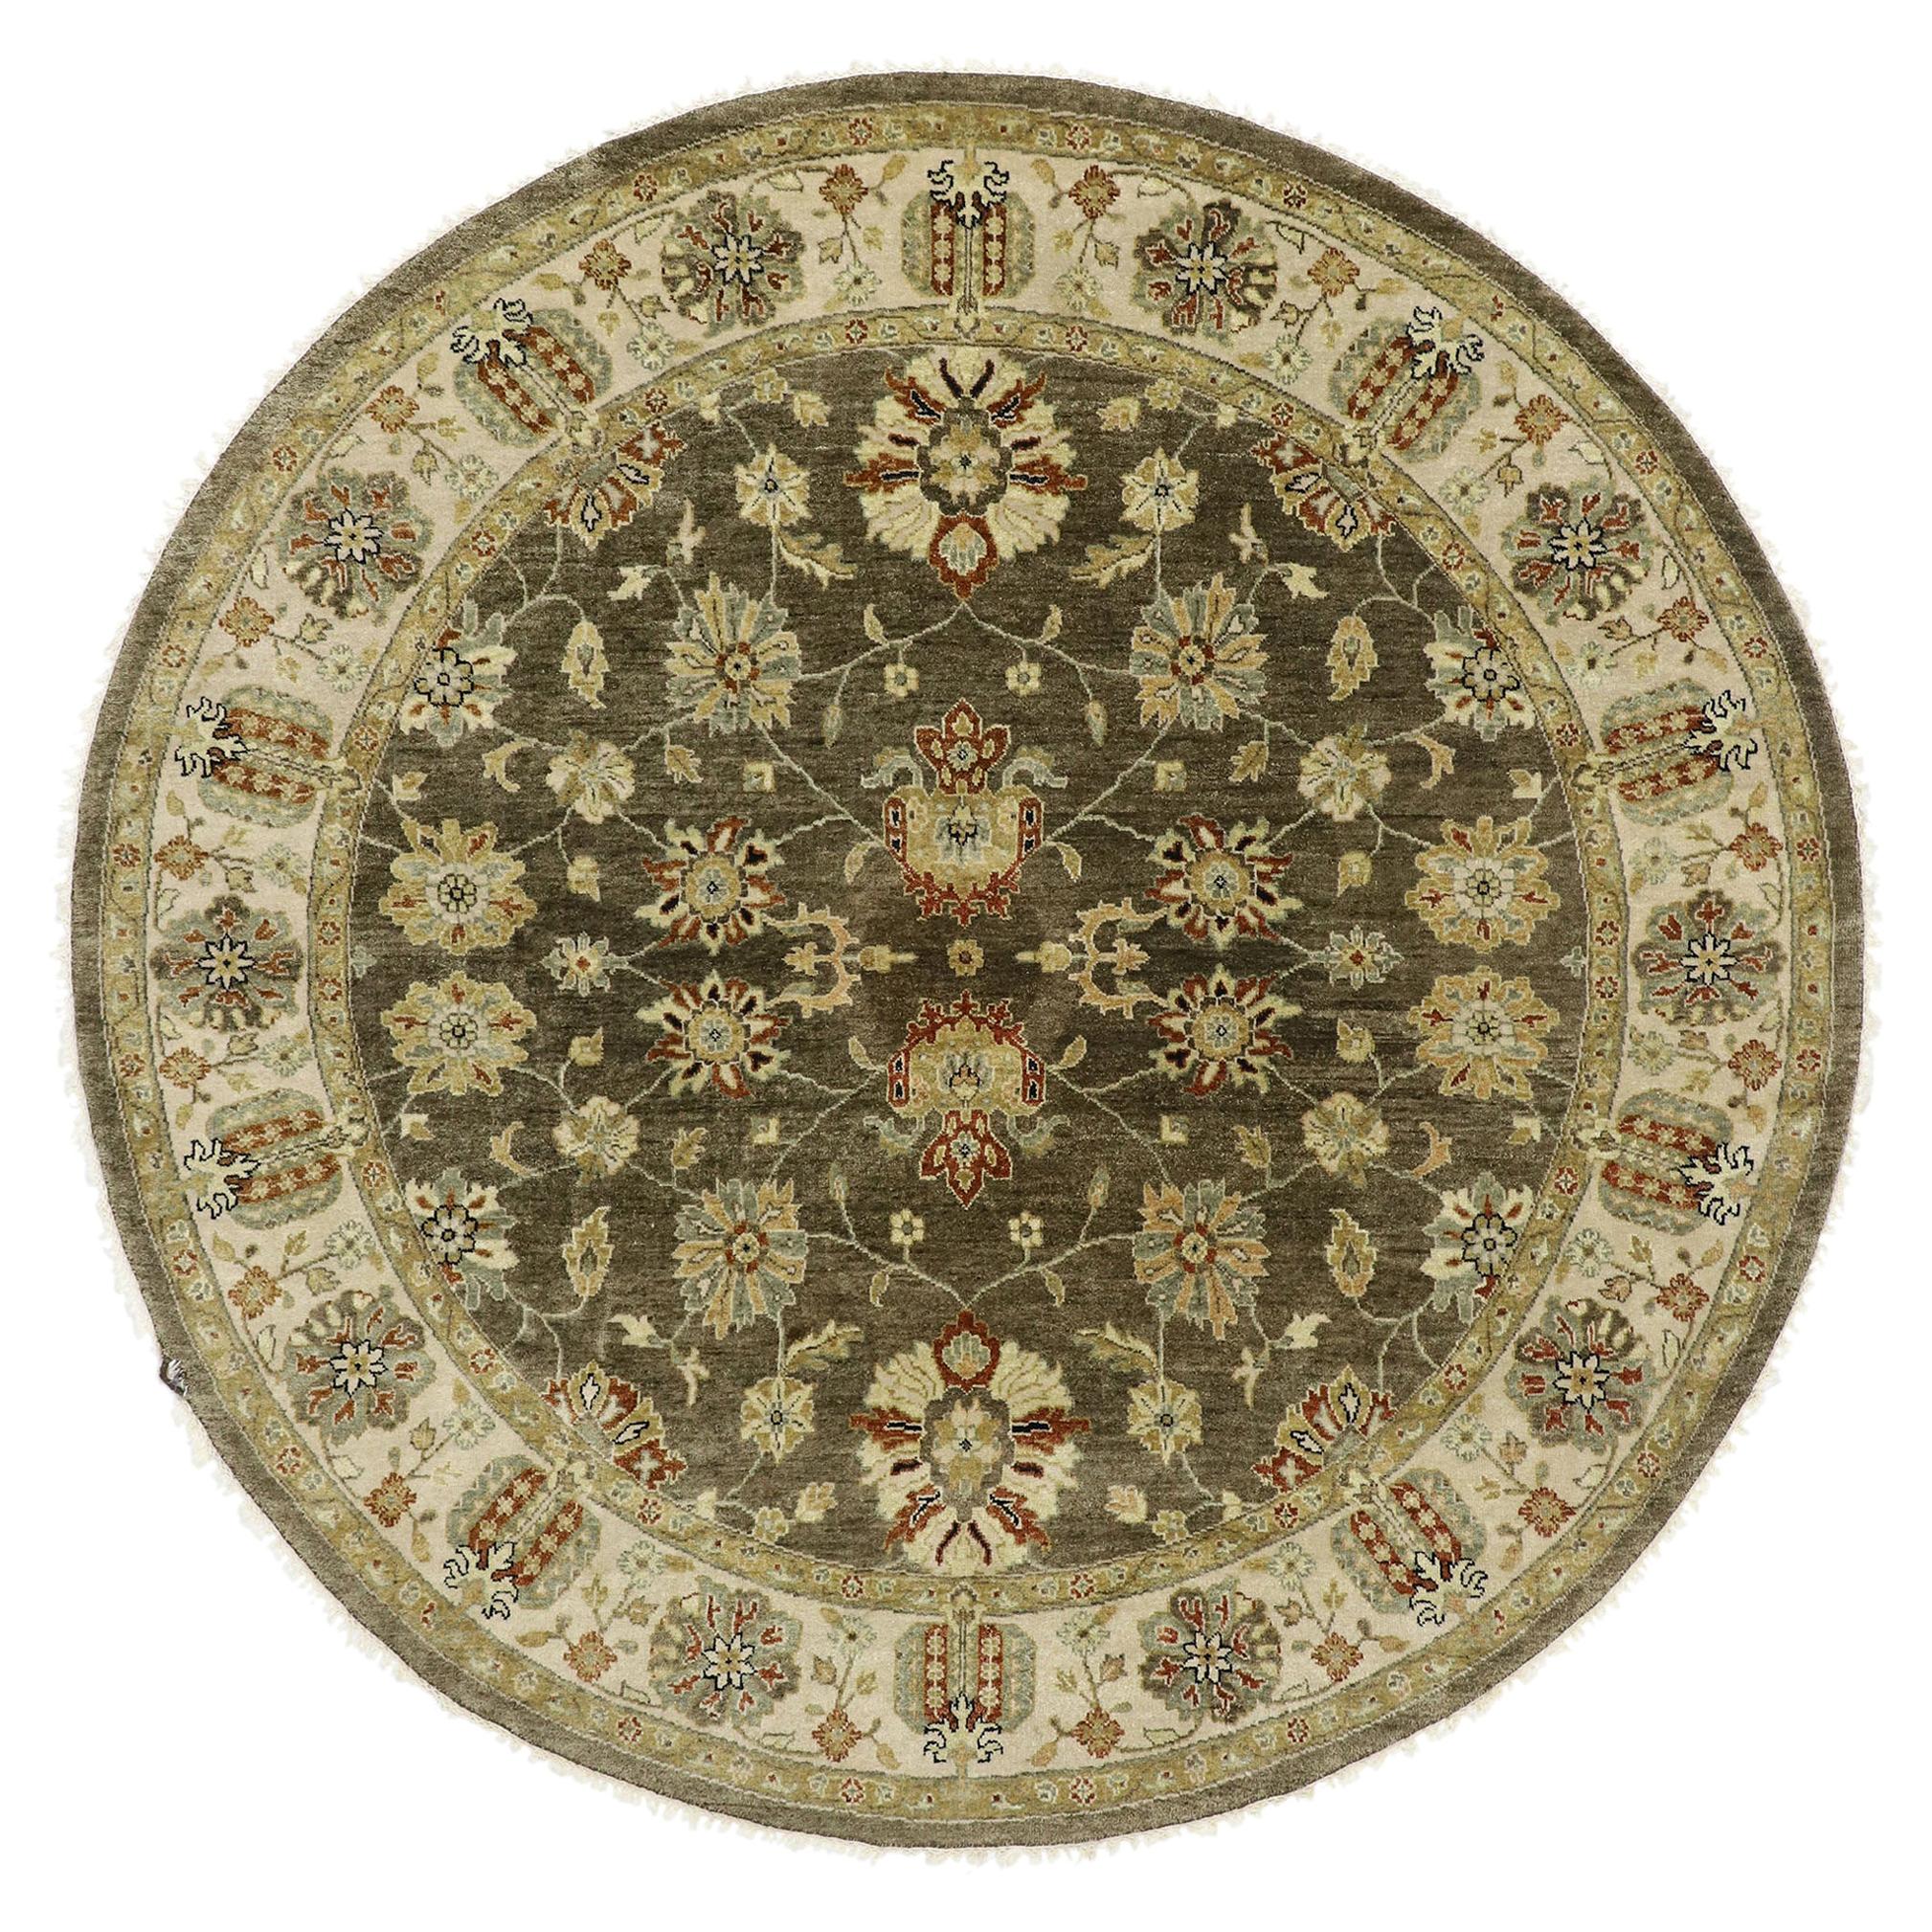 Tapis rond indien vintage, tapis circulaire style Arts and Crafts